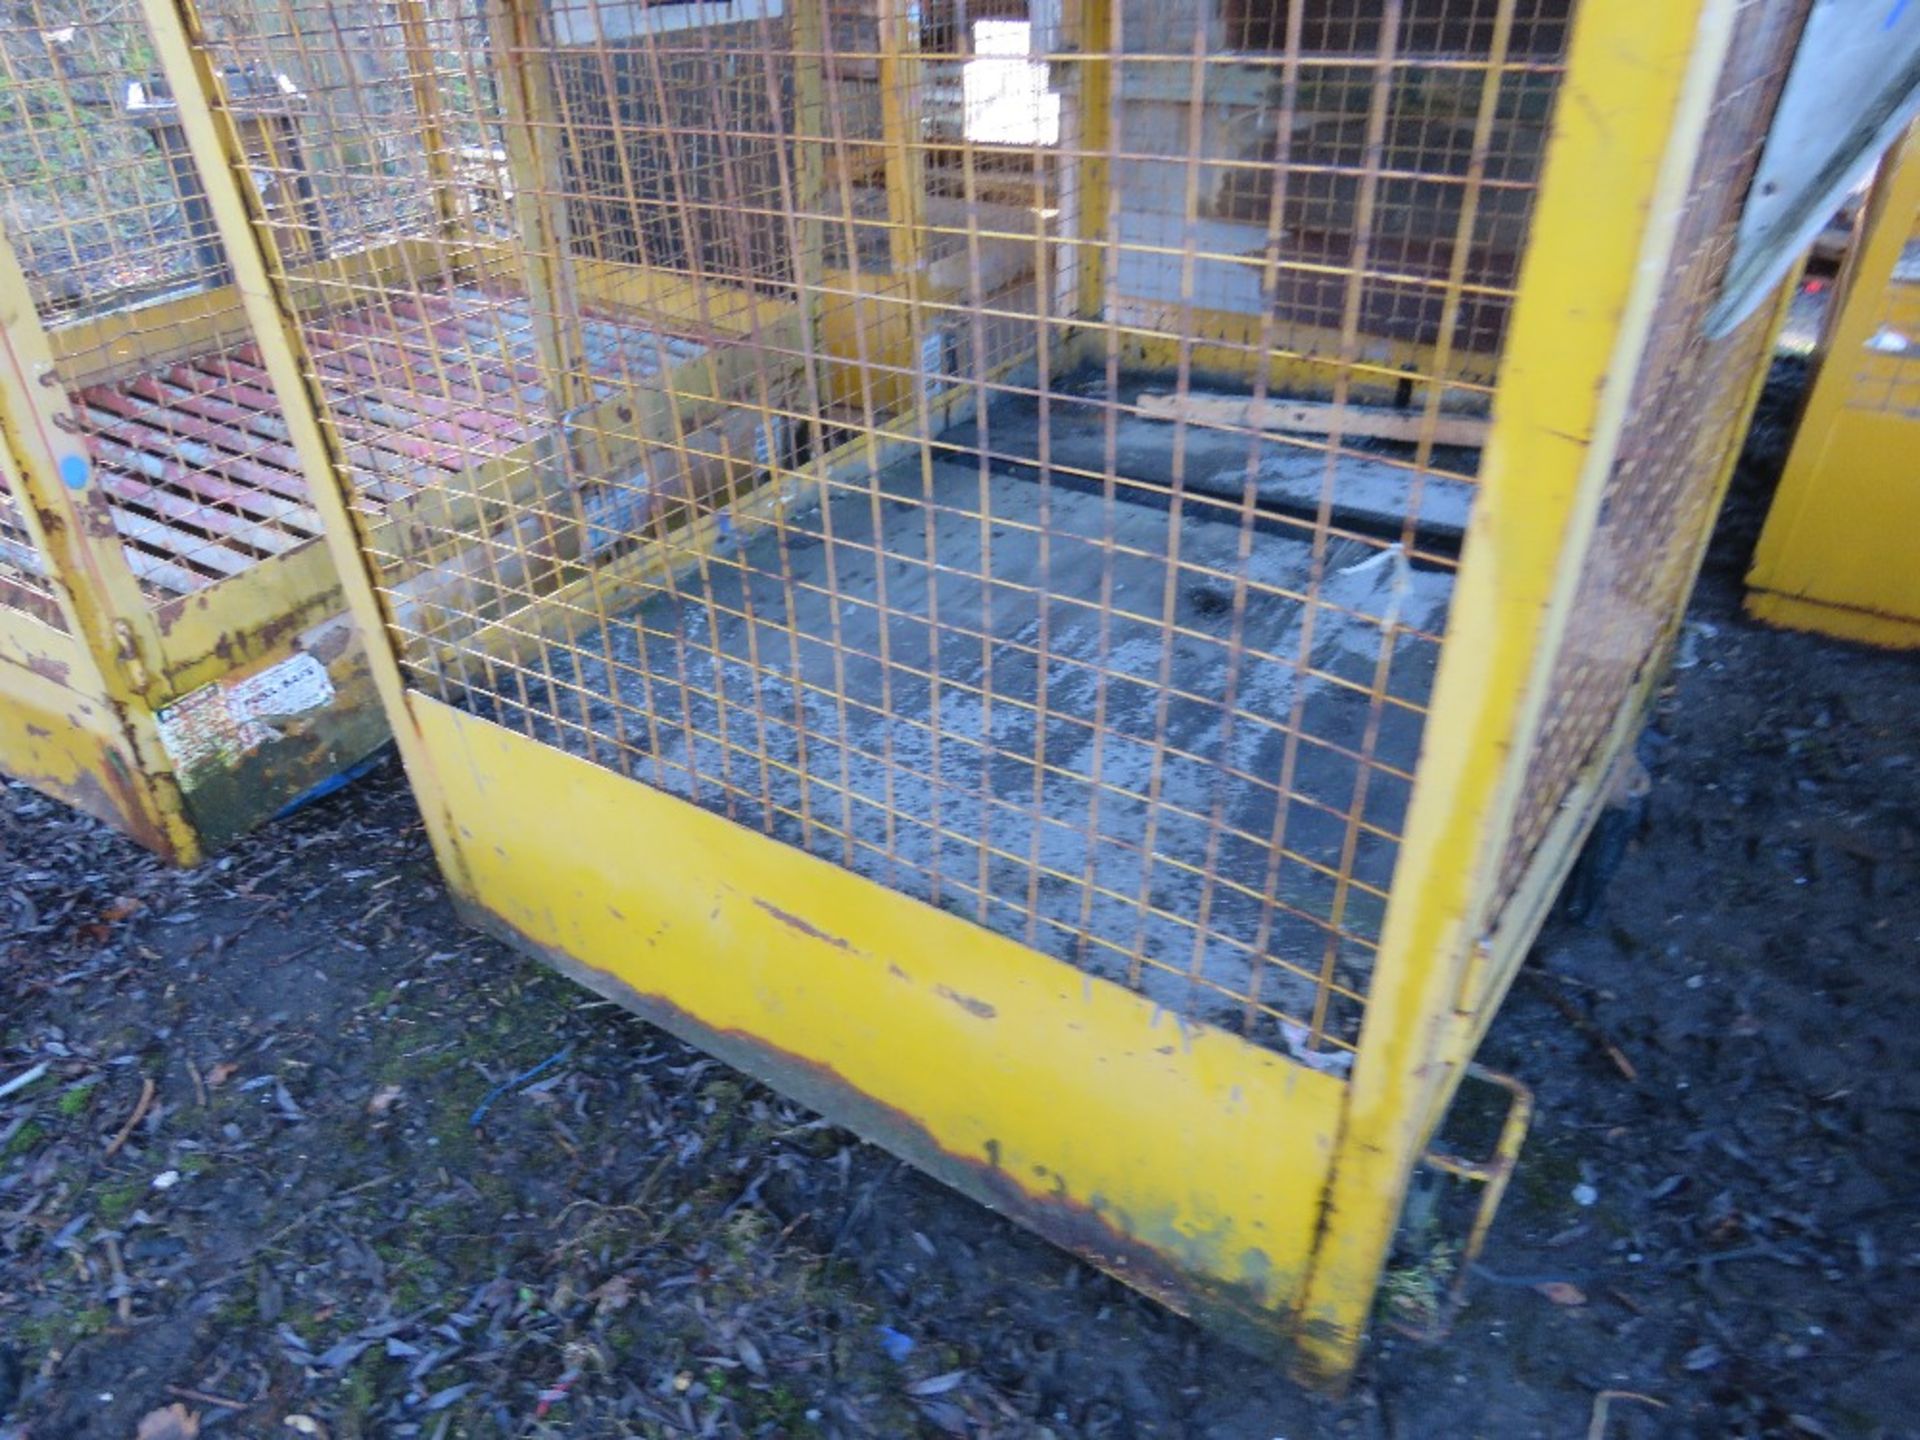 DRUM-STORE INTERCEPTOR LOCKABLE STORAGE CAGE WITH BUNDED BASE.SIZE: 1.38M X 1.84M X 2.55M HEIGHT AP - Image 2 of 3